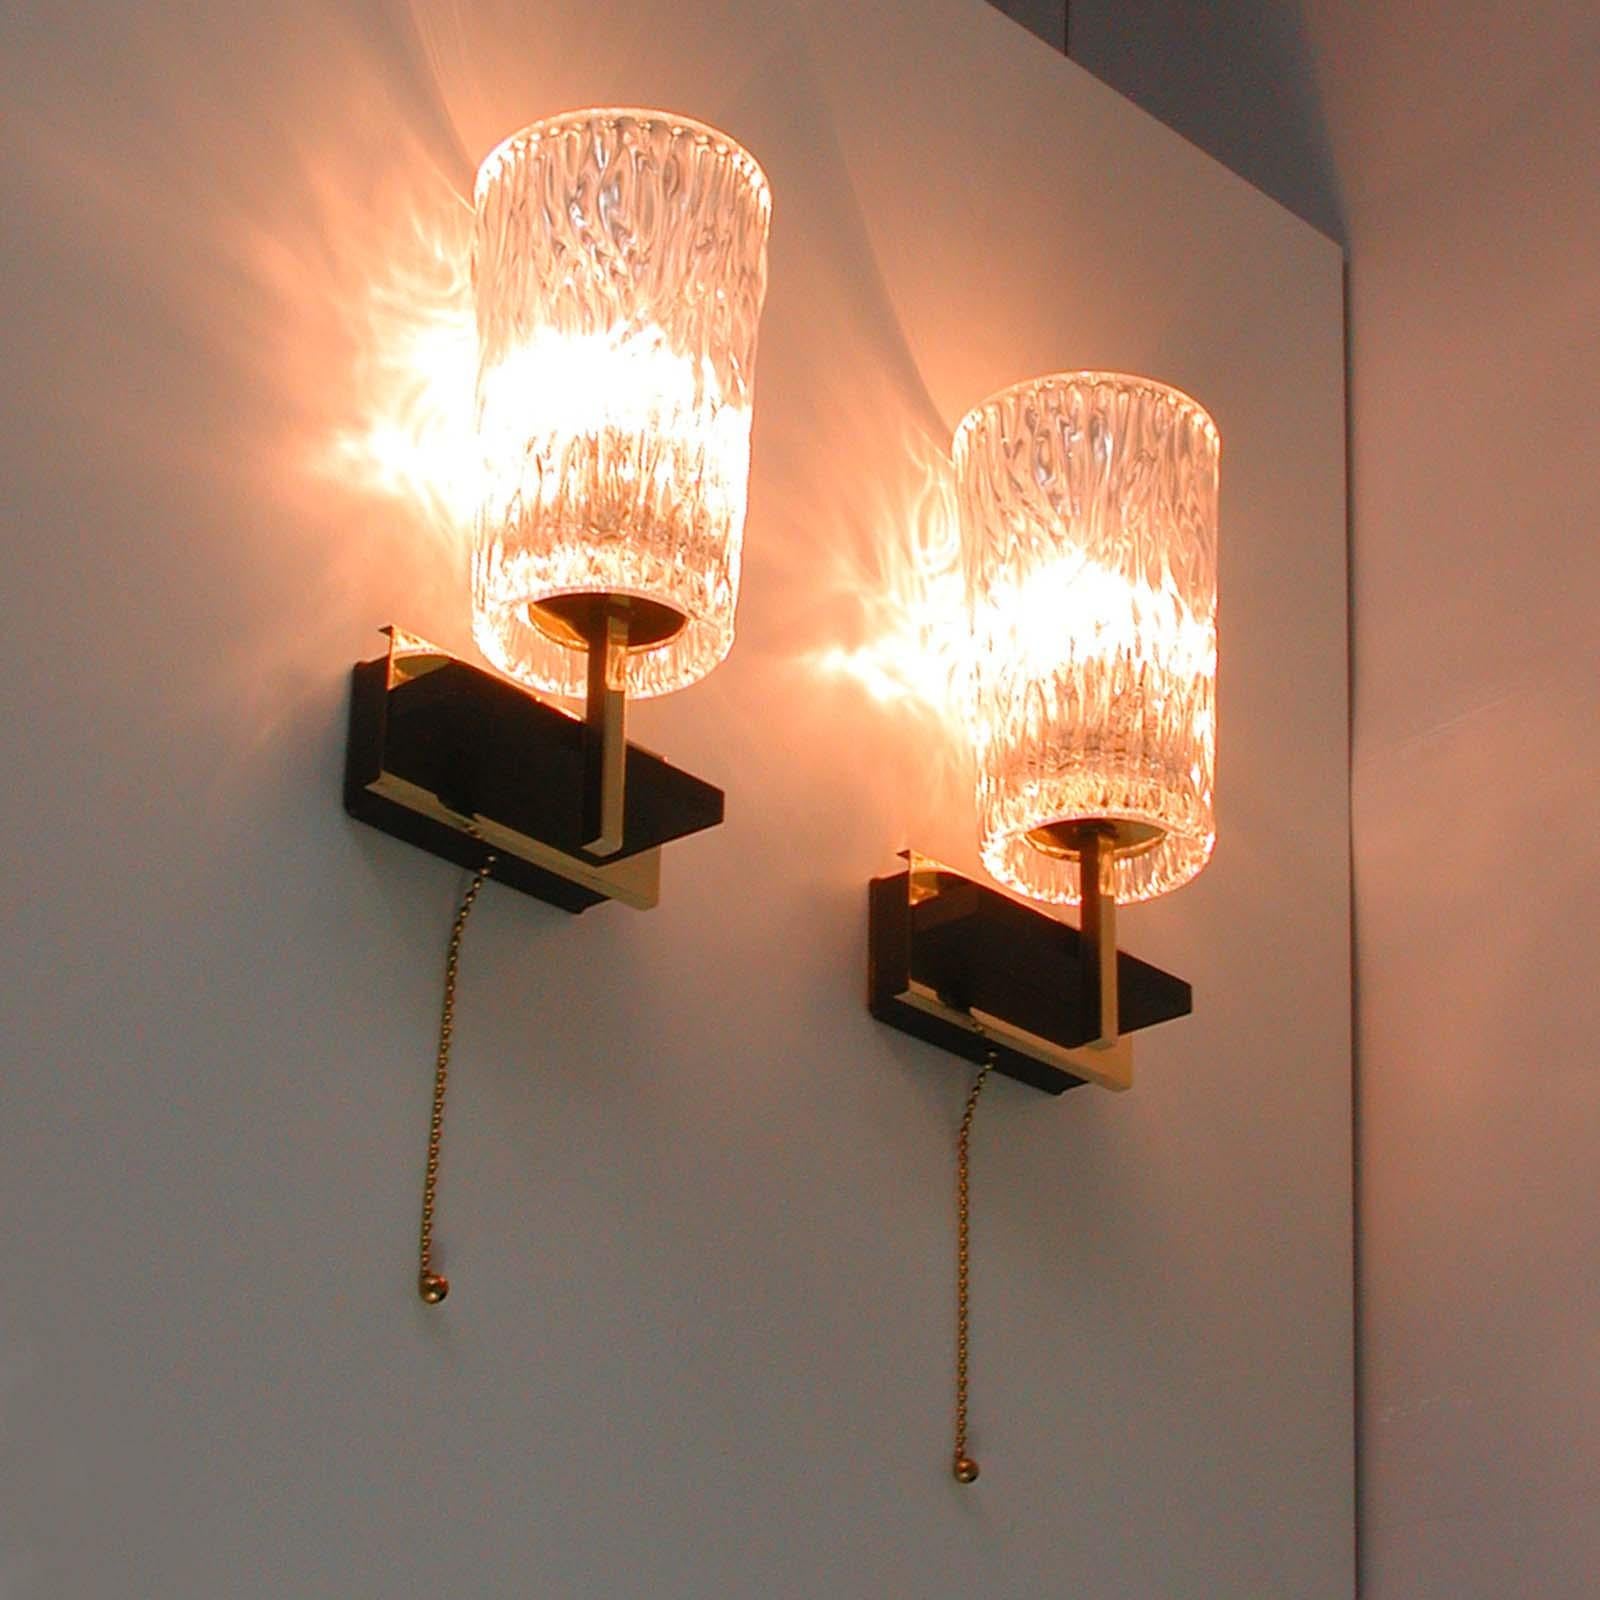 Midcentury French Brass and Textured Glass Sconces by Maison Arlus, 1950s For Sale 10